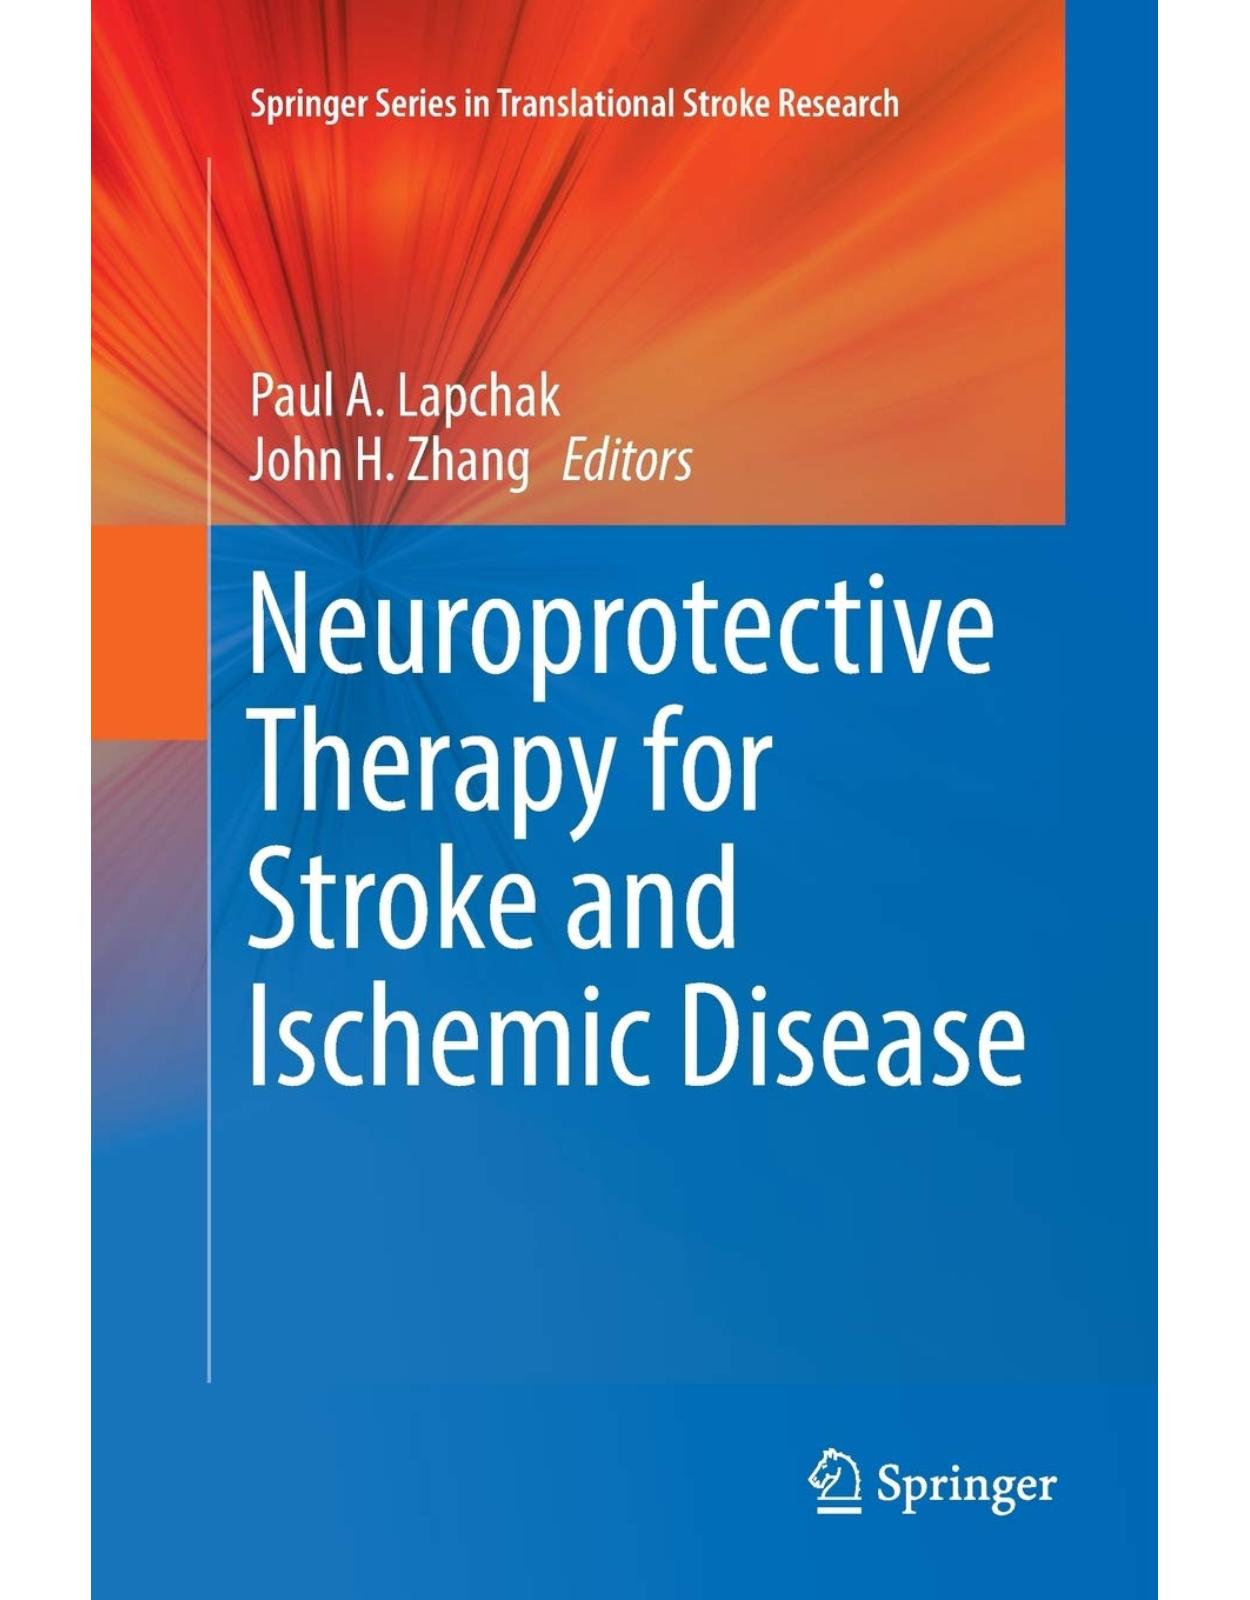 Neuroprotective Therapy for Stroke and Ischemic Disease